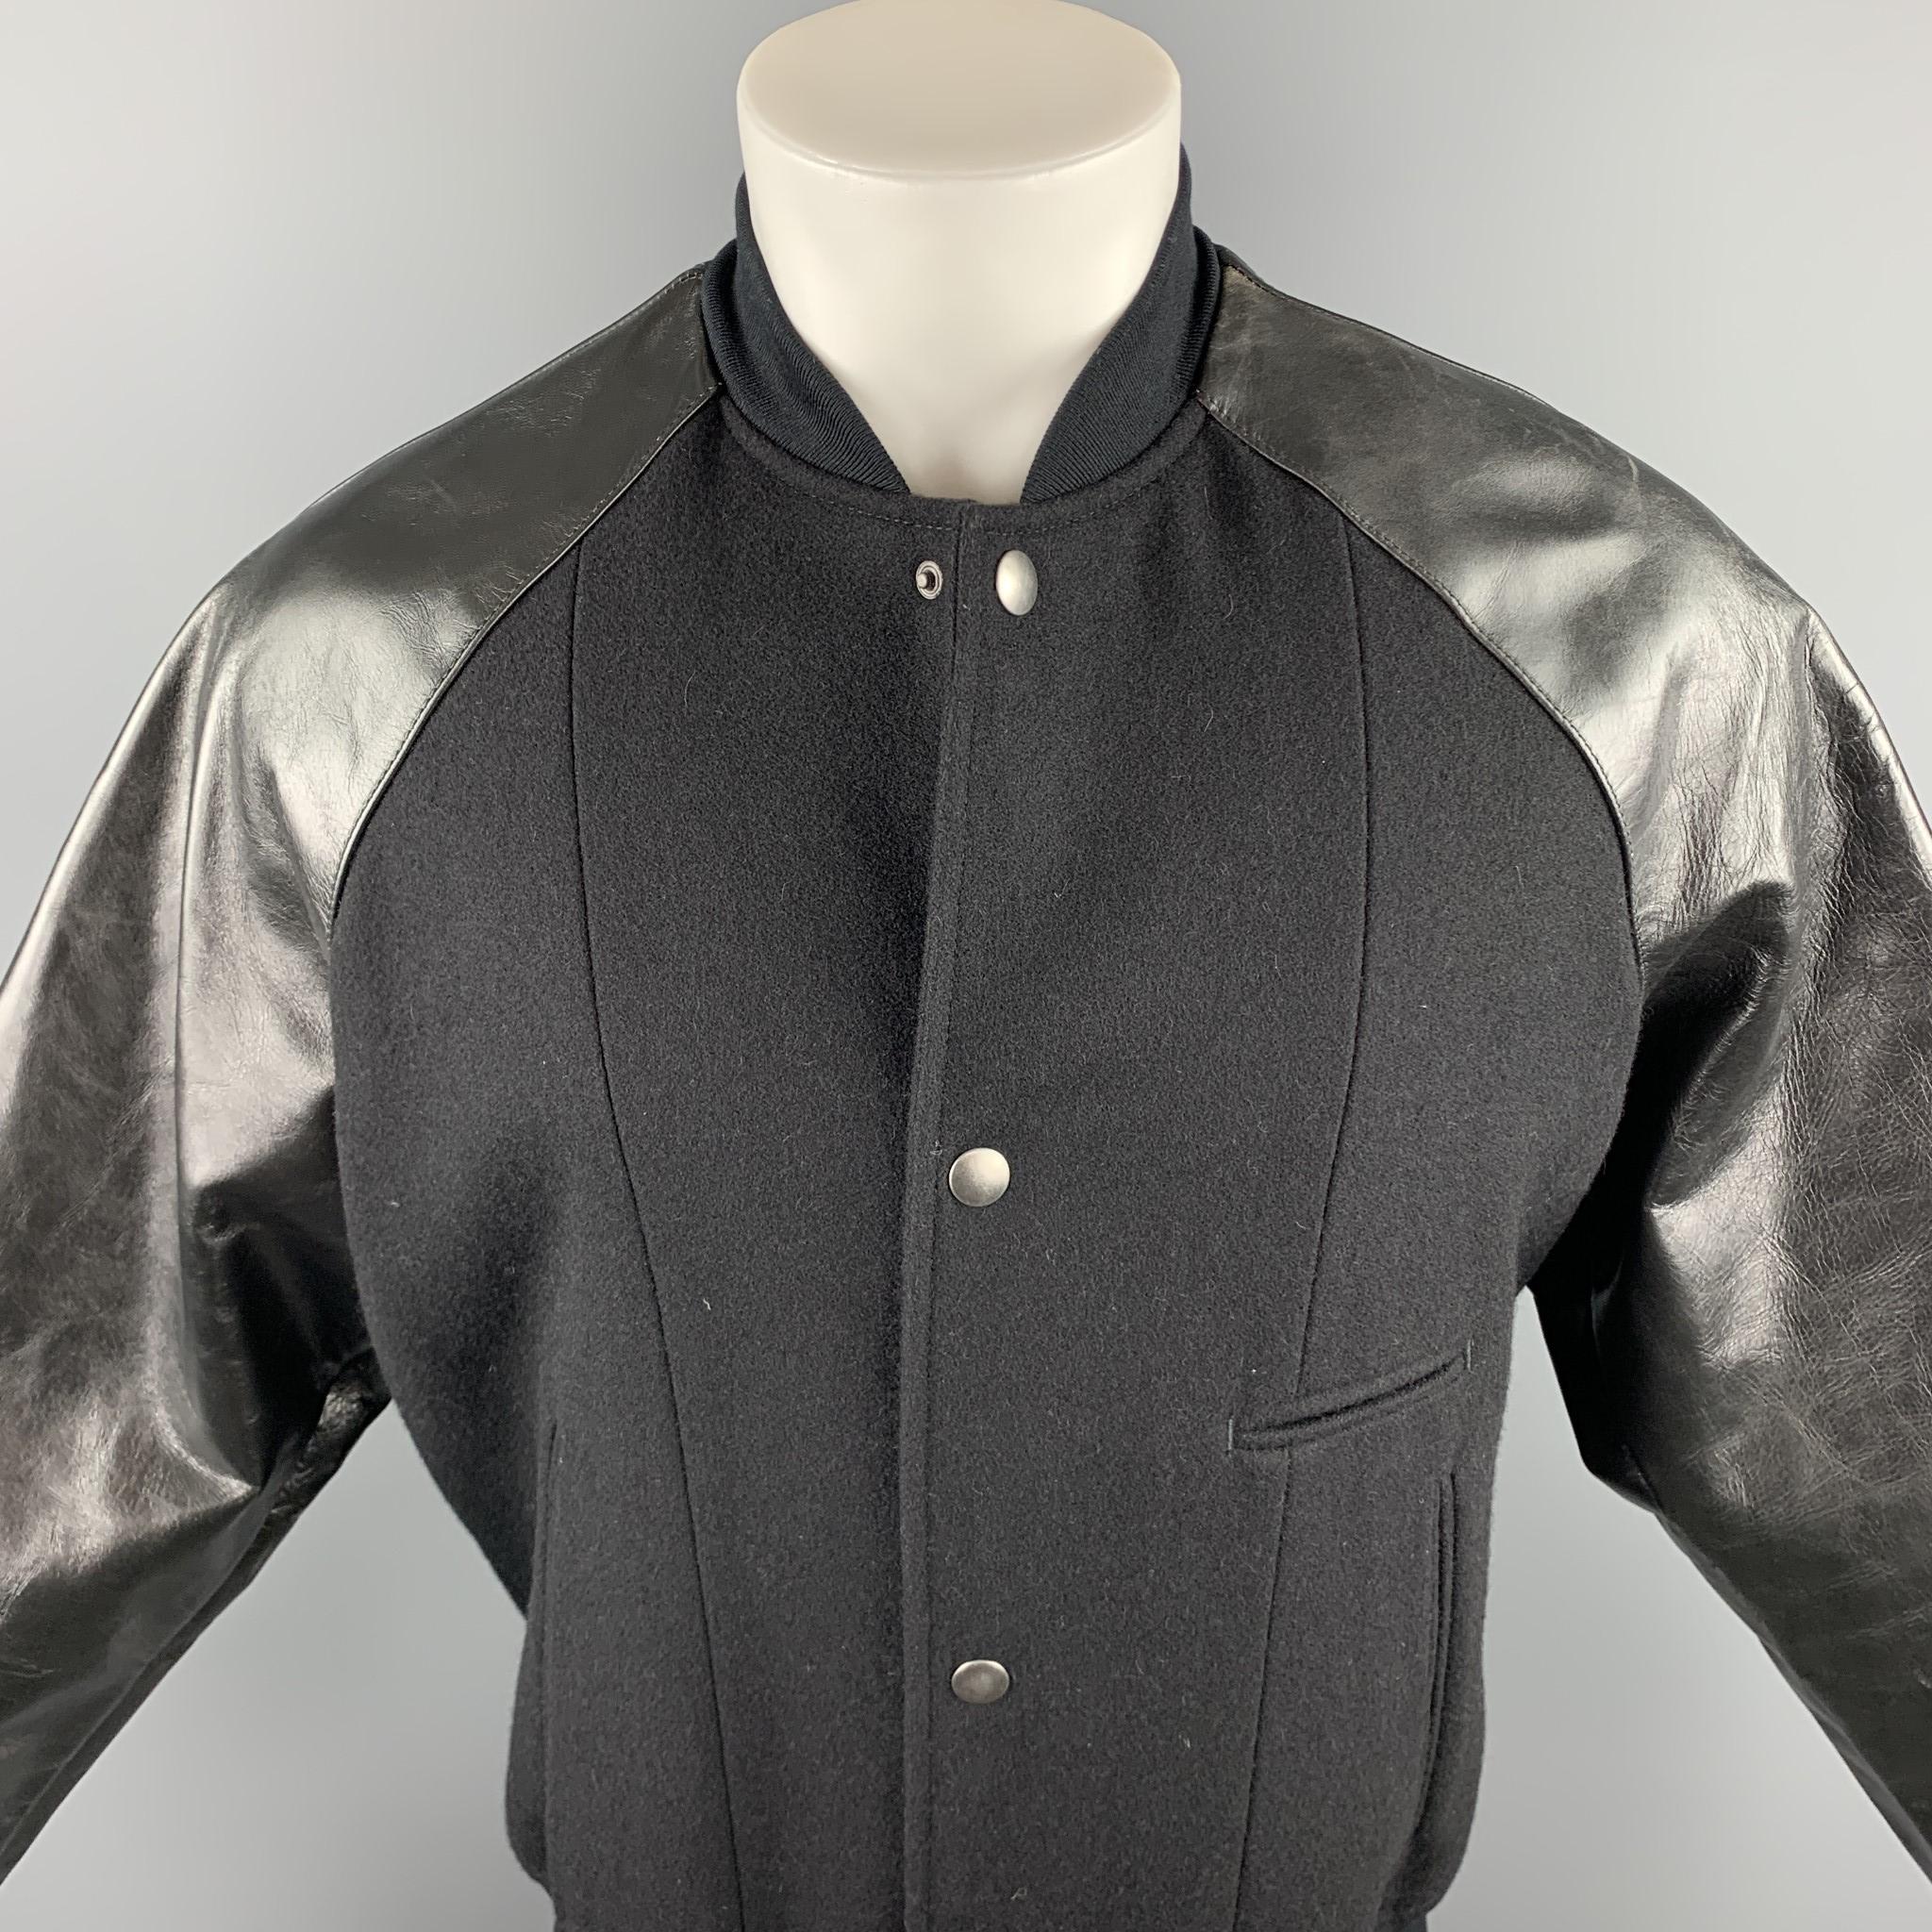 MARC JACOBS jacket comes in a black wool with mixed materials featuring leather sleeves, slit pockets, and a snap button closure. Made in Italy.

Excellent Pre-Owned Condition.
Marked: IT 48

Measurements:

Shoulder: 17 in. 
Chest: 38 in. 
Sleeve: